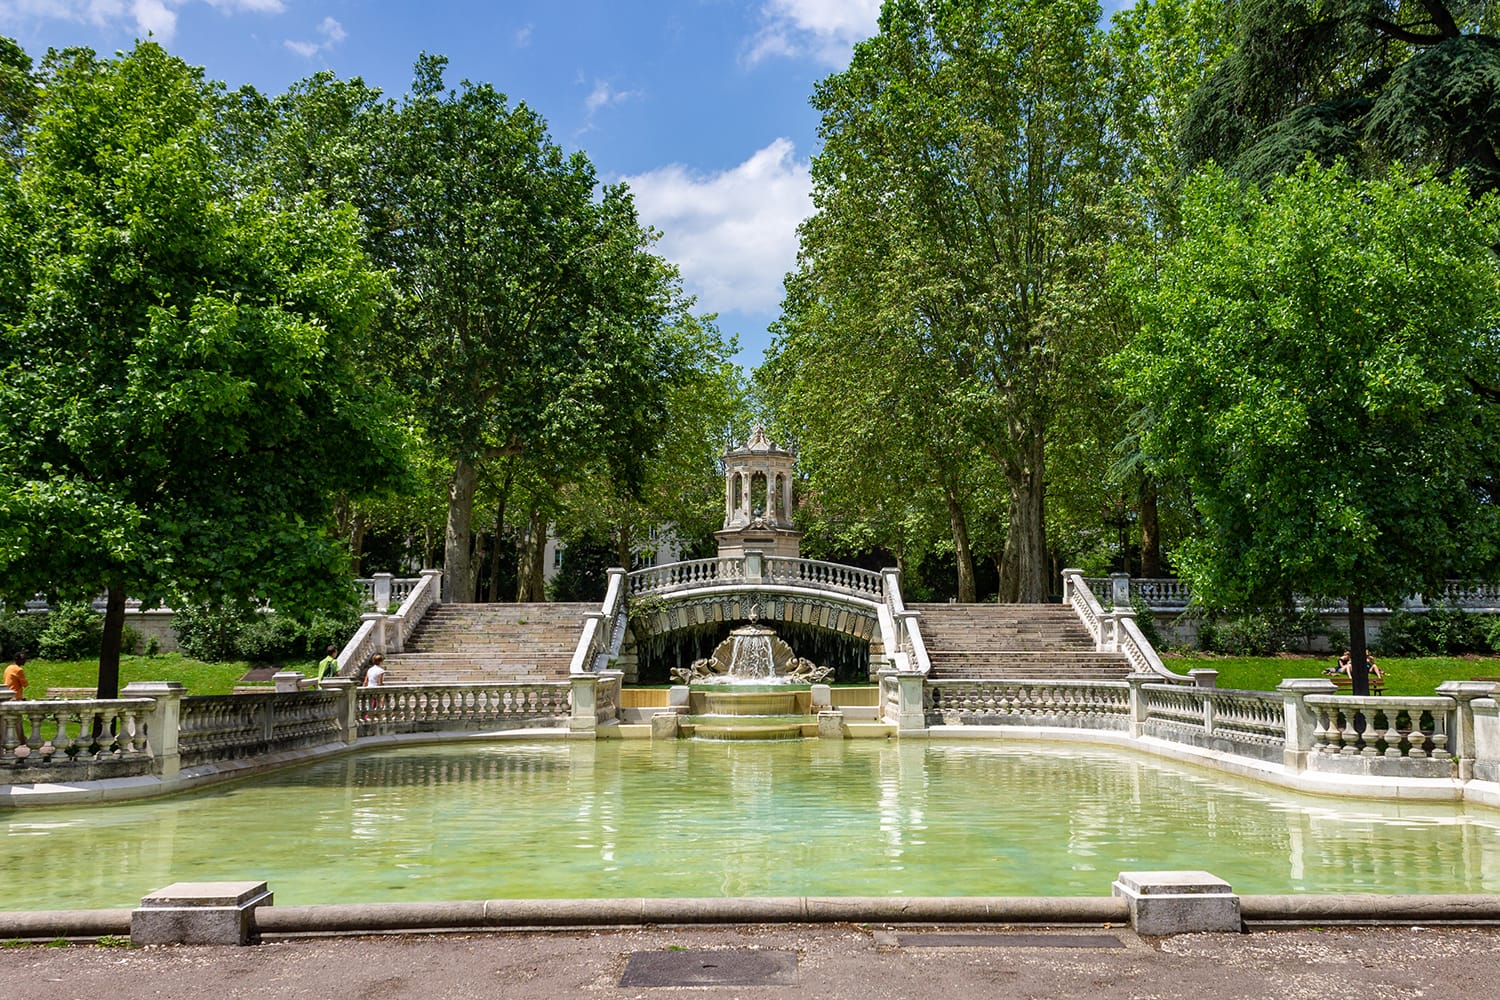 The view of Darcy square fountain in Dijon, France